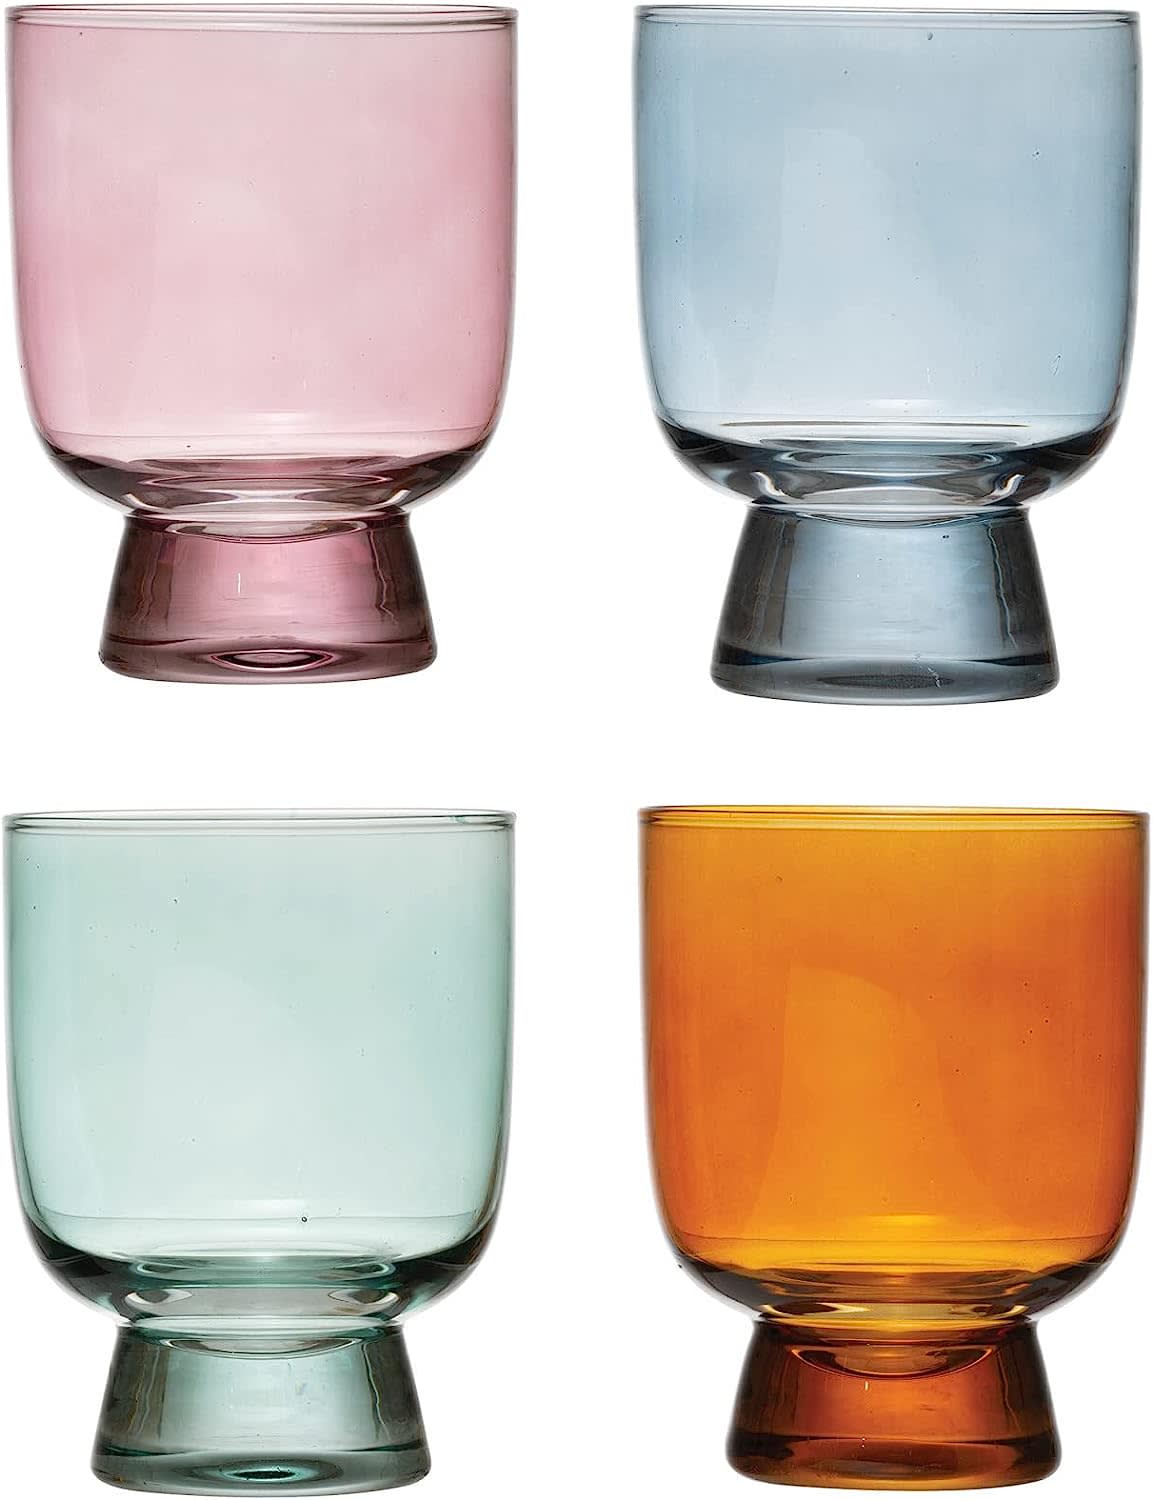 http://cdn.apartmenttherapy.info/image/upload/v1688669759/gen-workflow/product-database/Creative_Coop_Drinking_Glasses.jpg